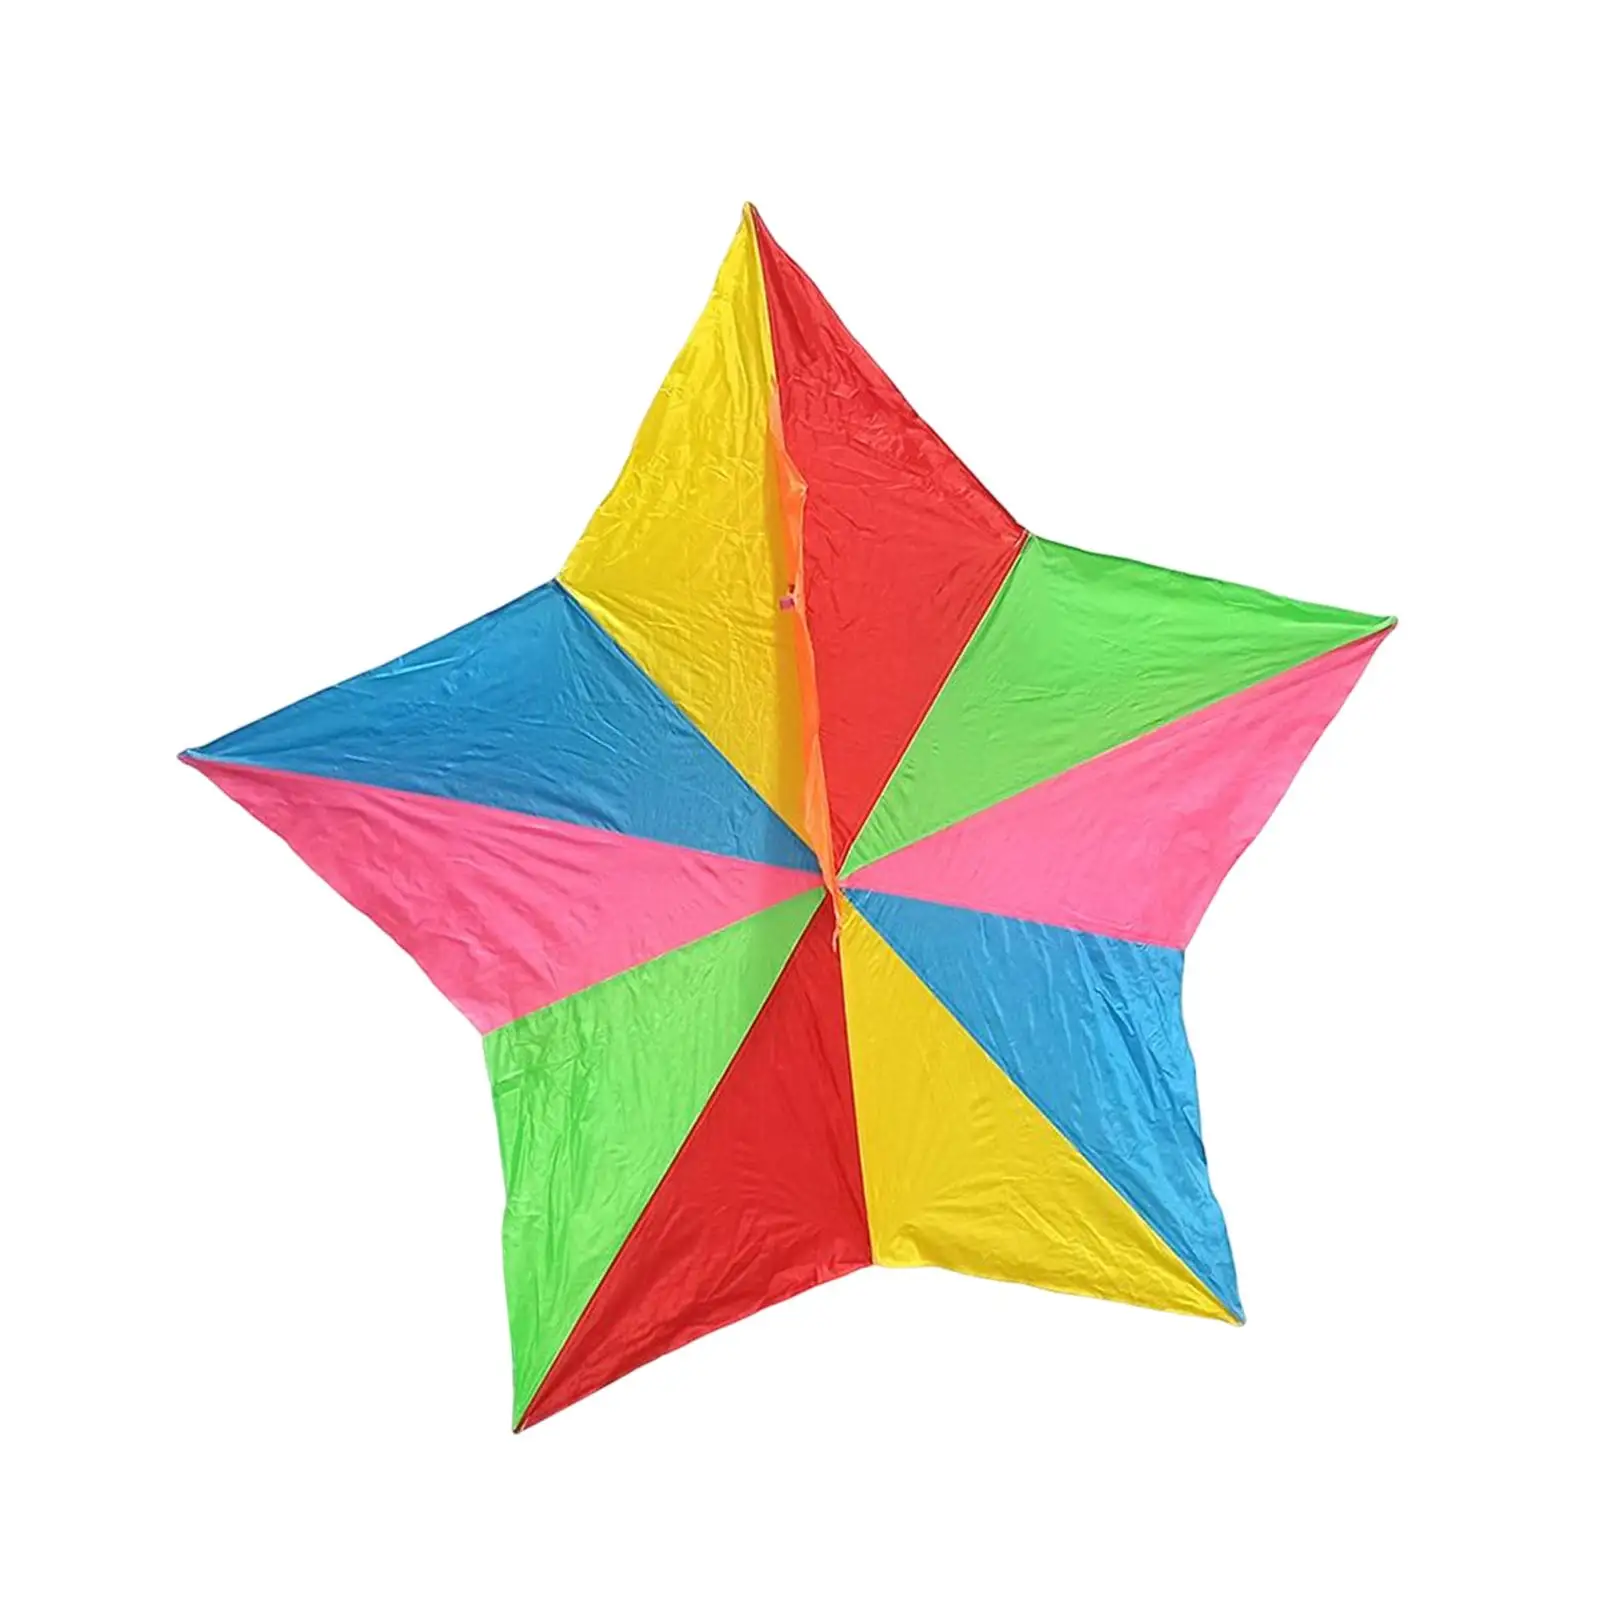 Large Five Pointed Star Kite Durable Cute Line Kite for Park Beach Lawn